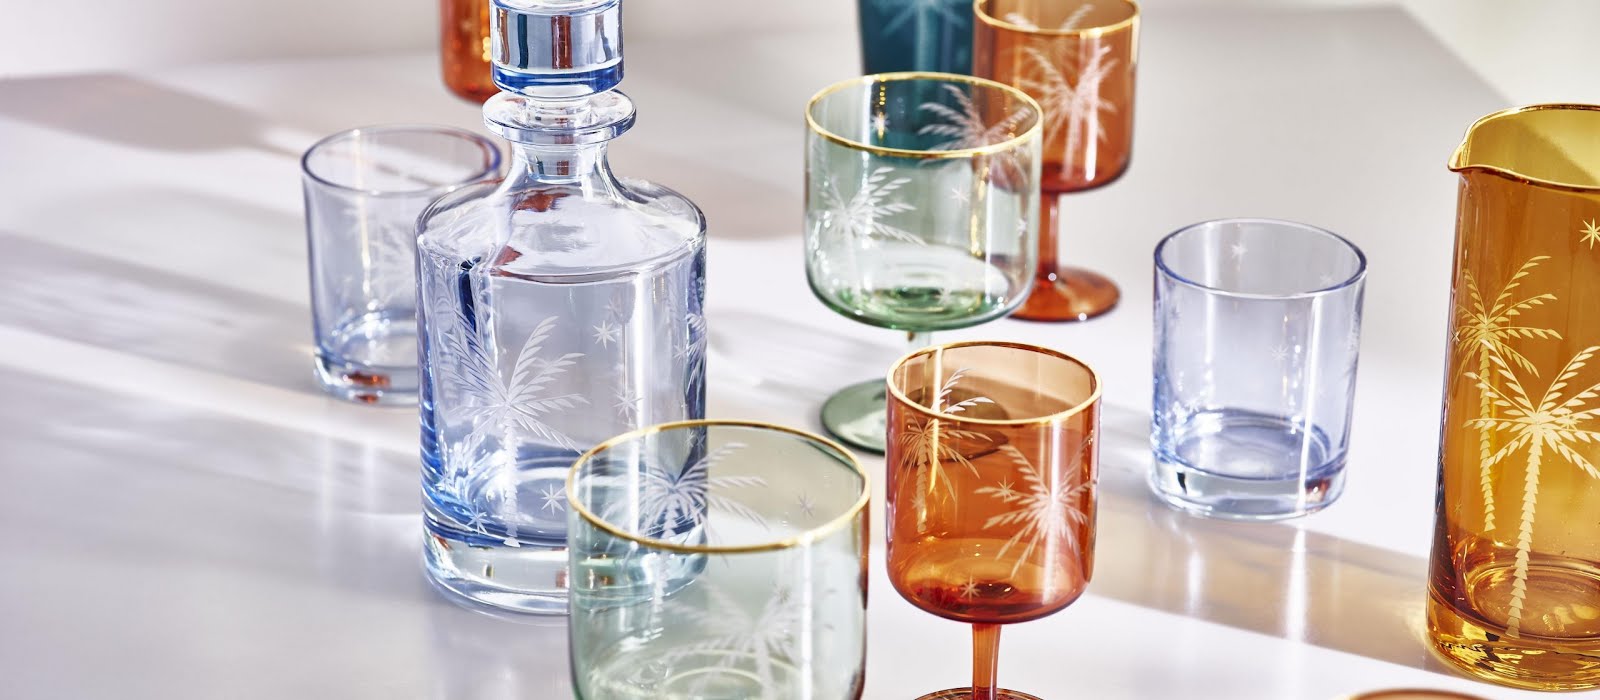 Elevate your weekend tipple with these gorgeous pieces to add to your bar cart